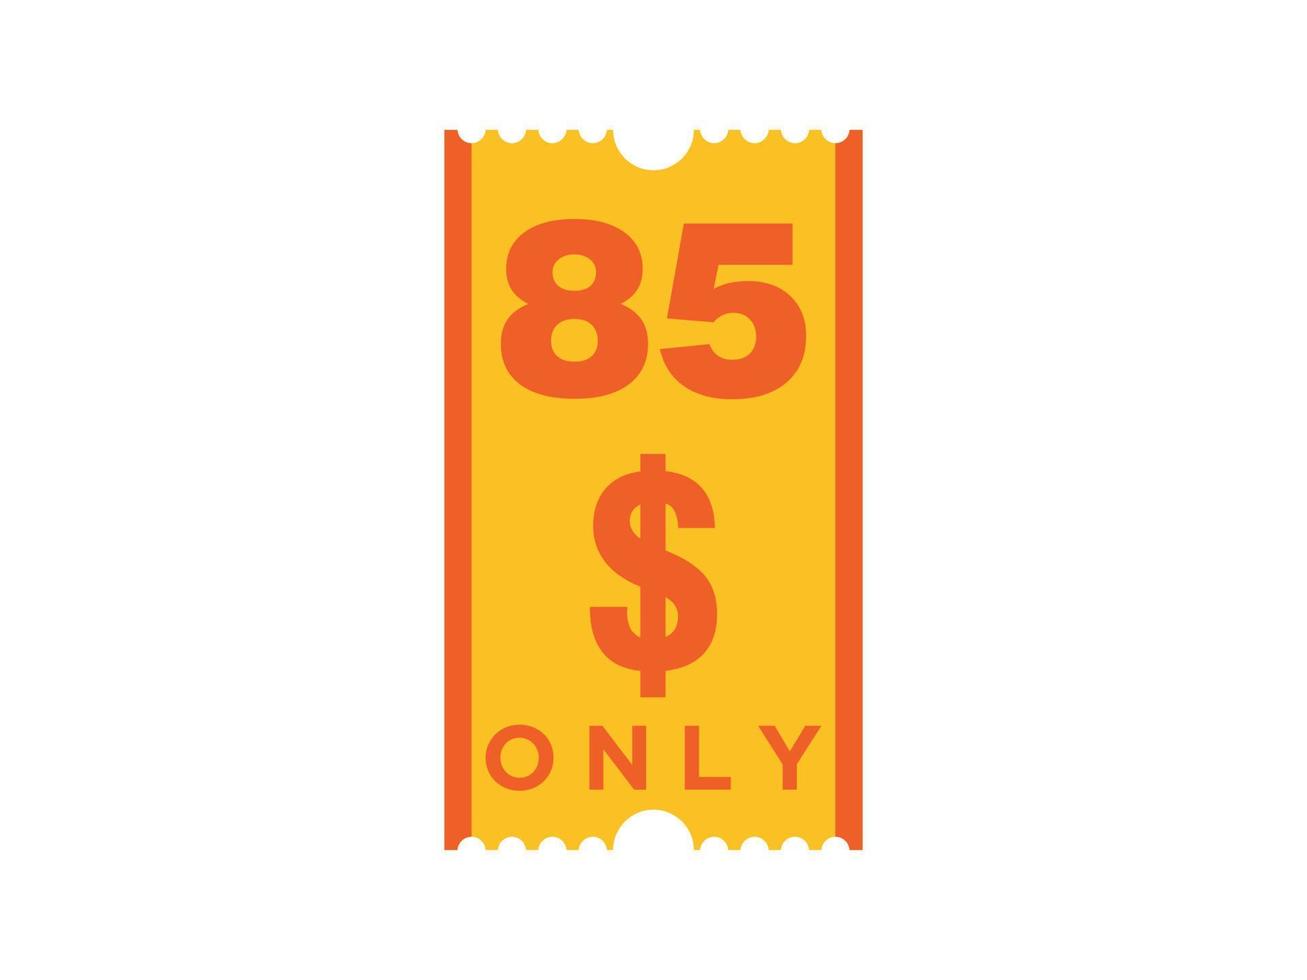 85 Dollar Only Coupon sign or Label or discount voucher Money Saving label, with coupon vector illustration summer offer ends weekend holiday